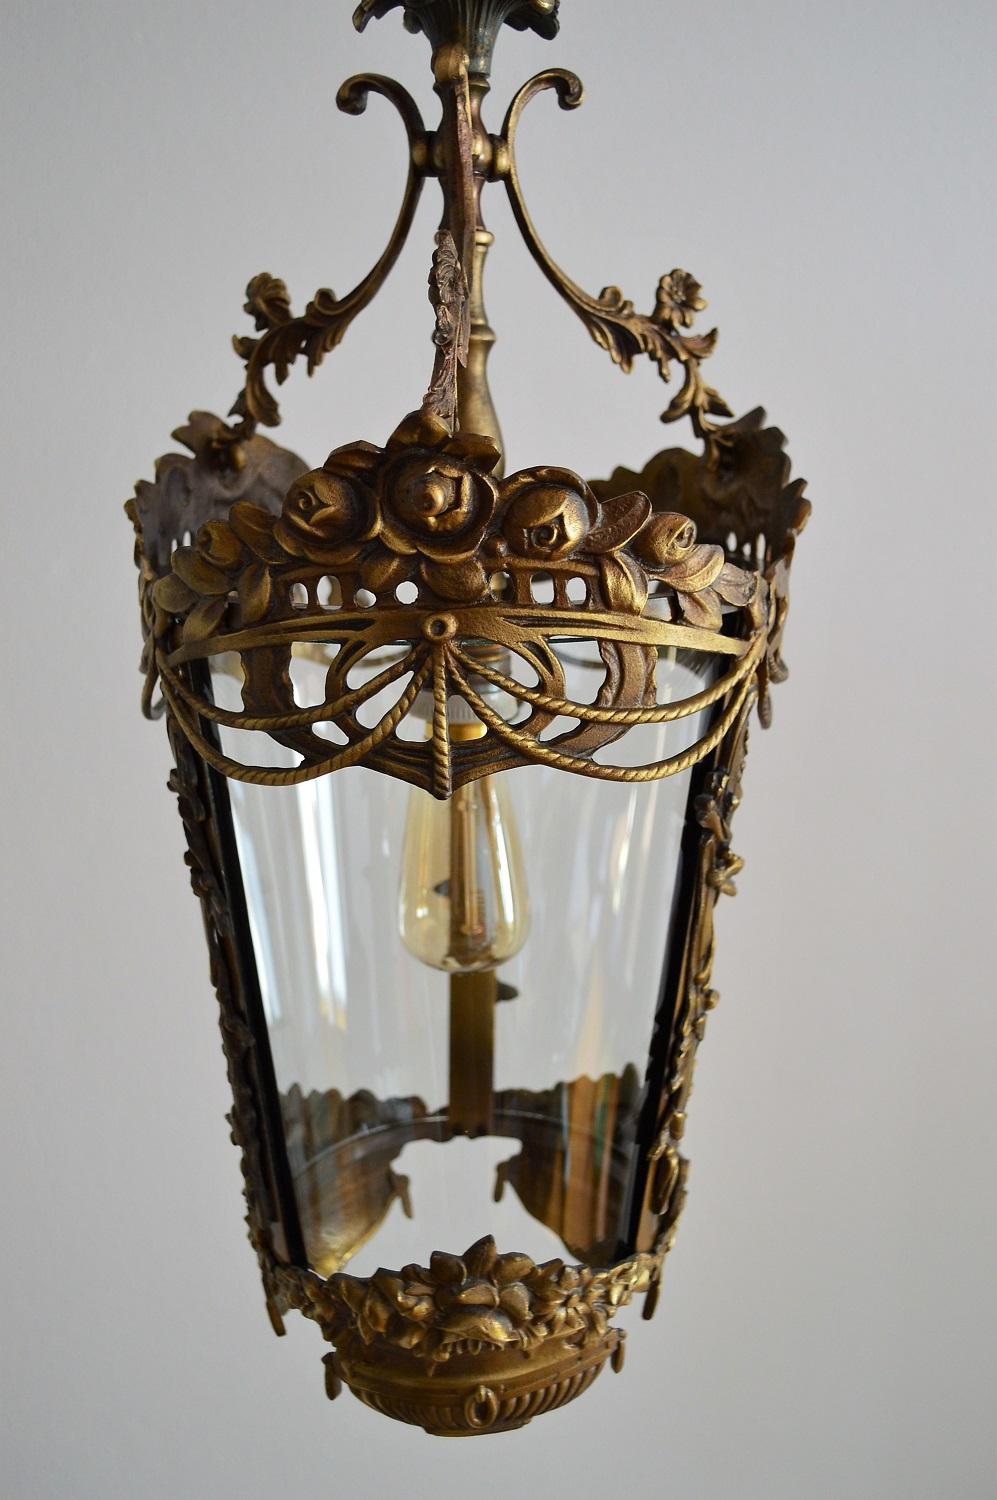 Italian Mid-Century Bronze Lantern with Flowers and Garlands, 1950s For Sale 1